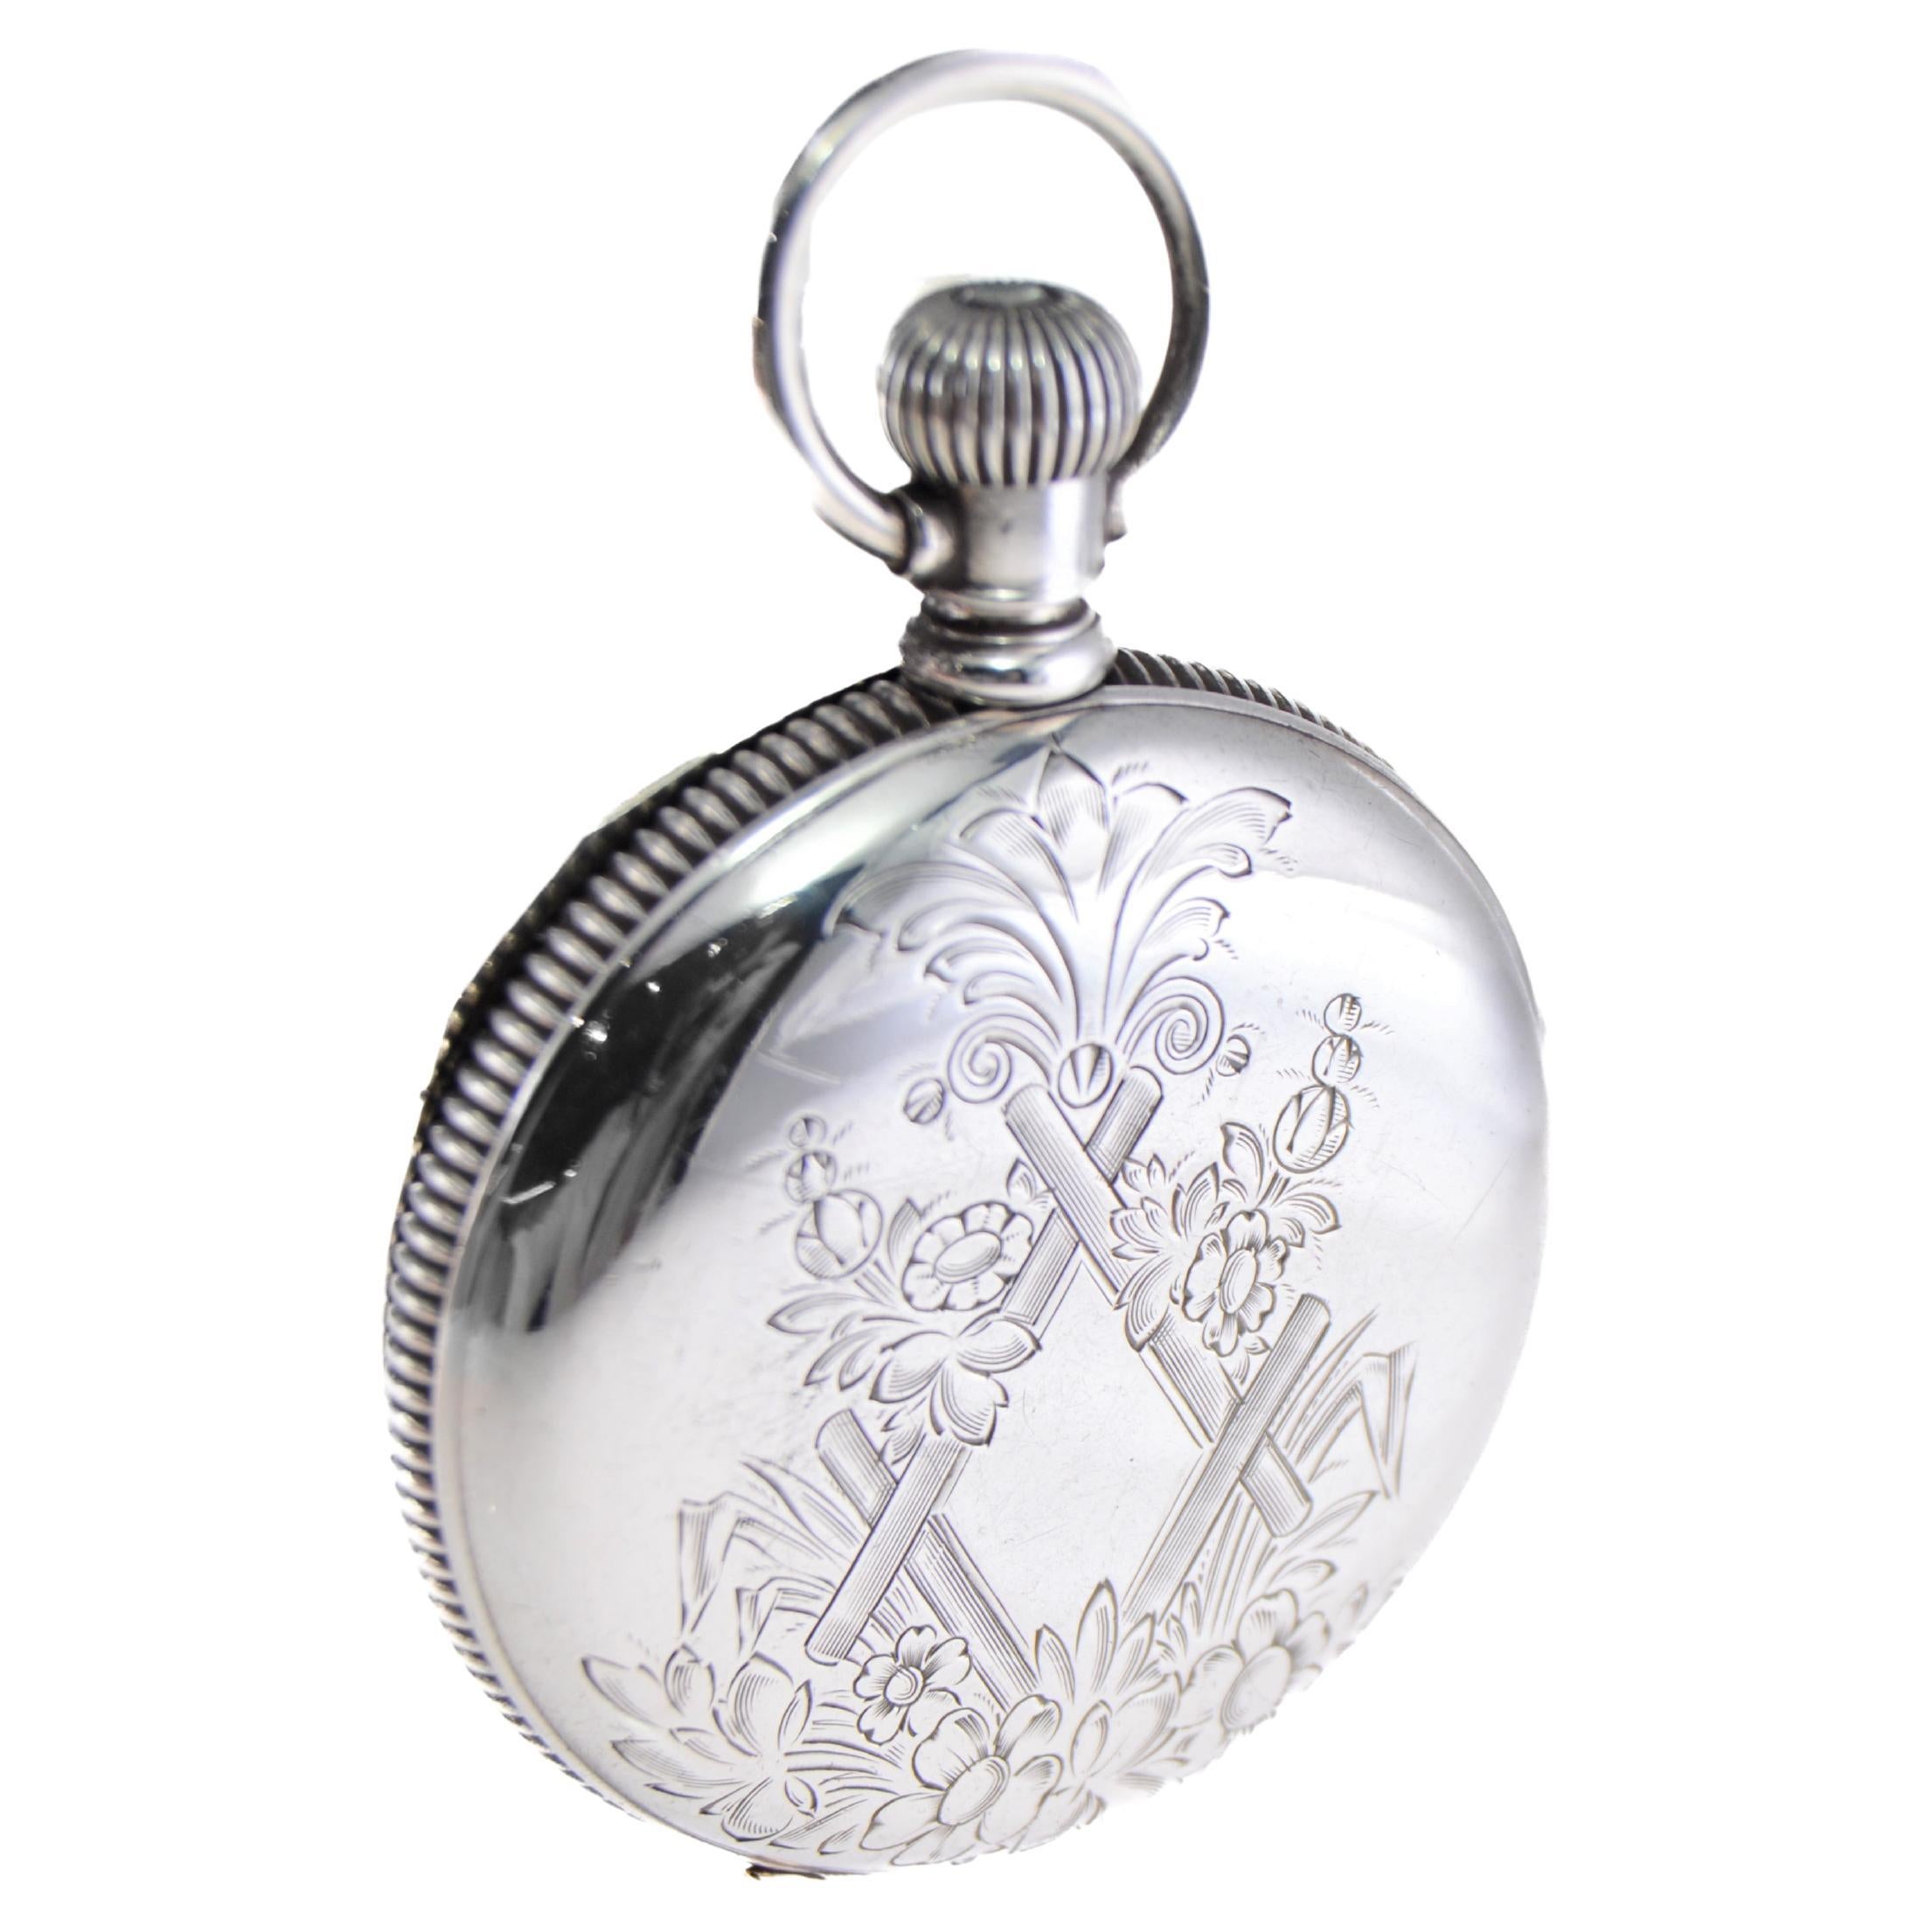 Illinois Silver Hunters Case Pocket Watch from 1893 with Pocket Watch Chain  For Sale 2